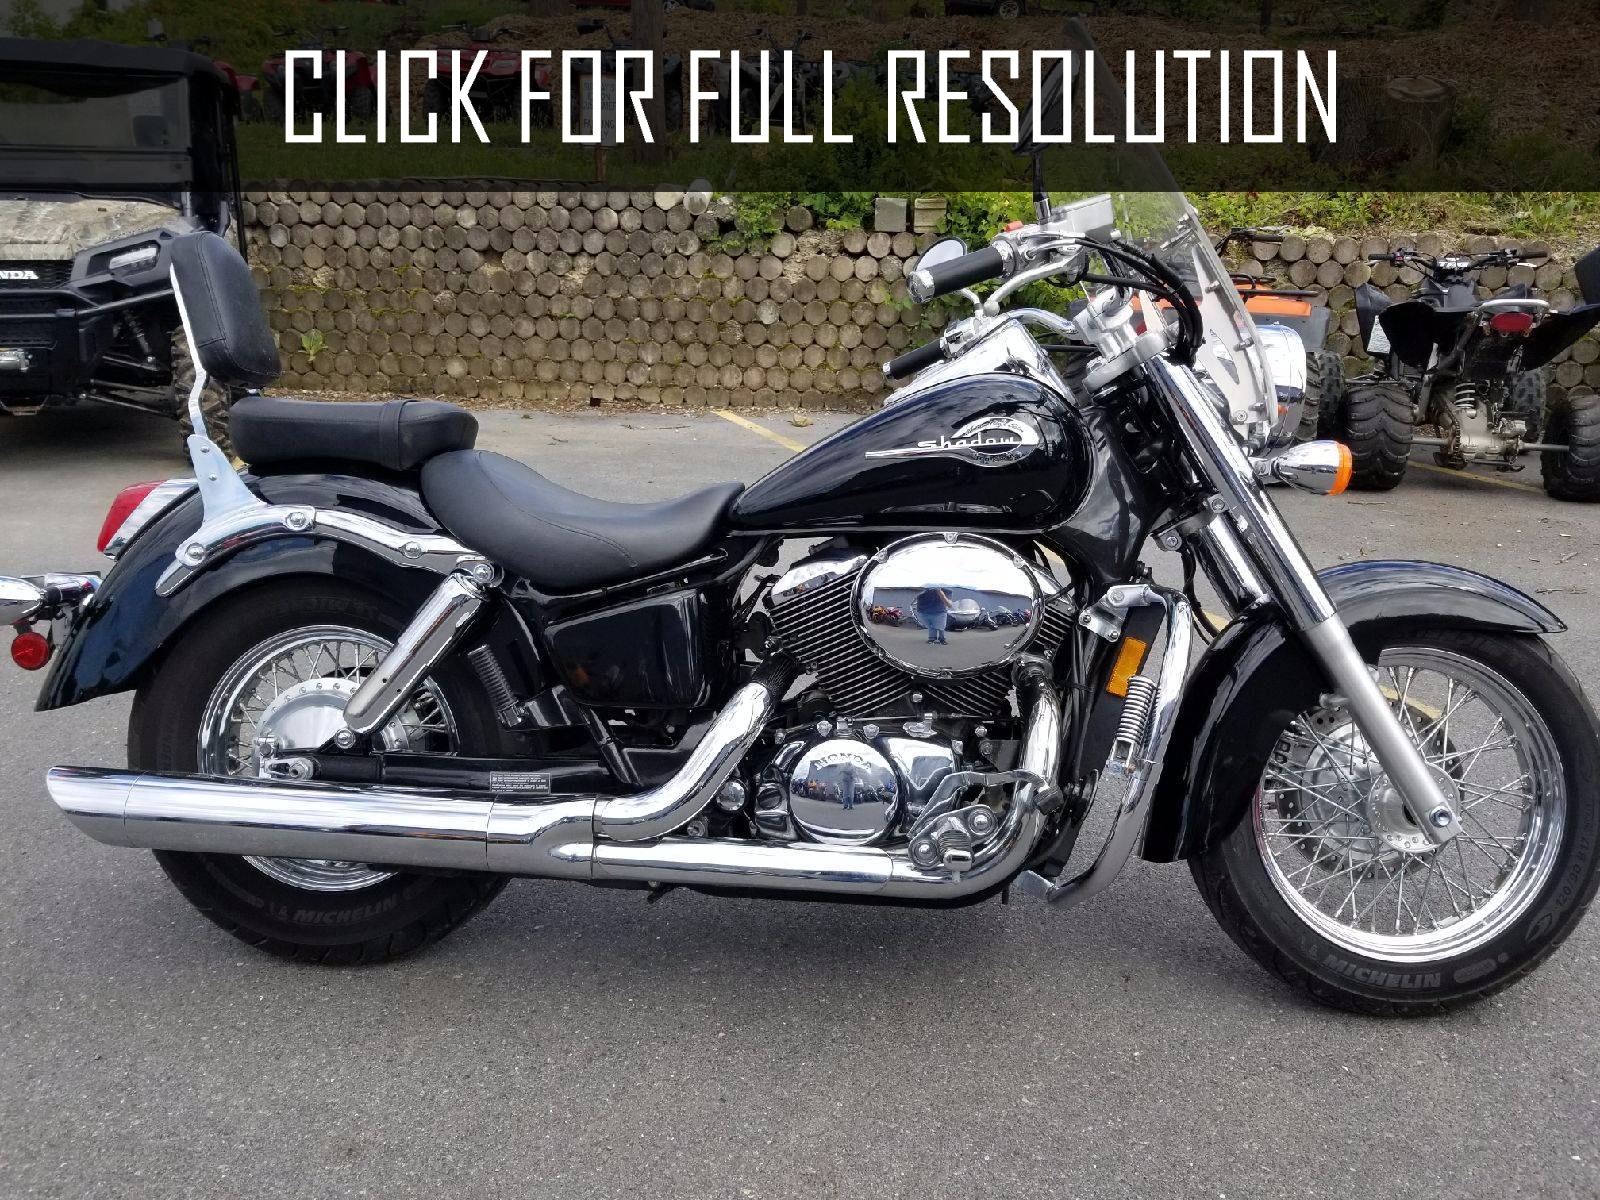 Honda Shadow Ace 750 - amazing photo gallery, some information and ...